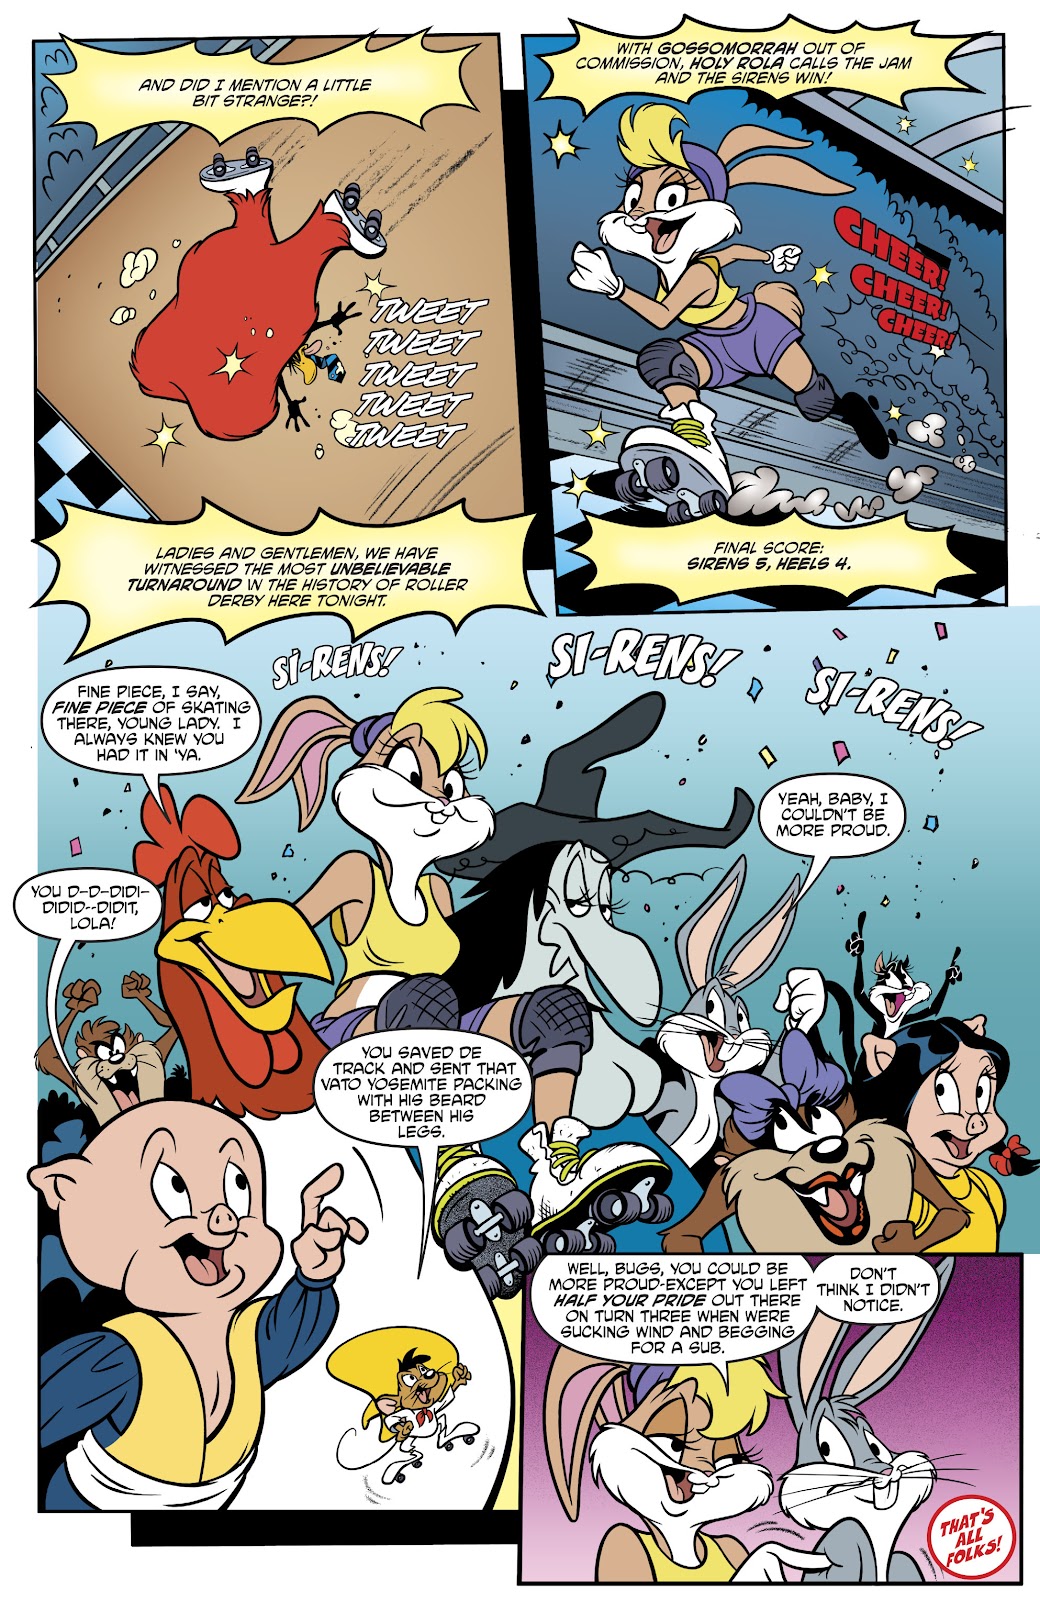 Read Online Looney Tunes 1994 Comic Issue 250